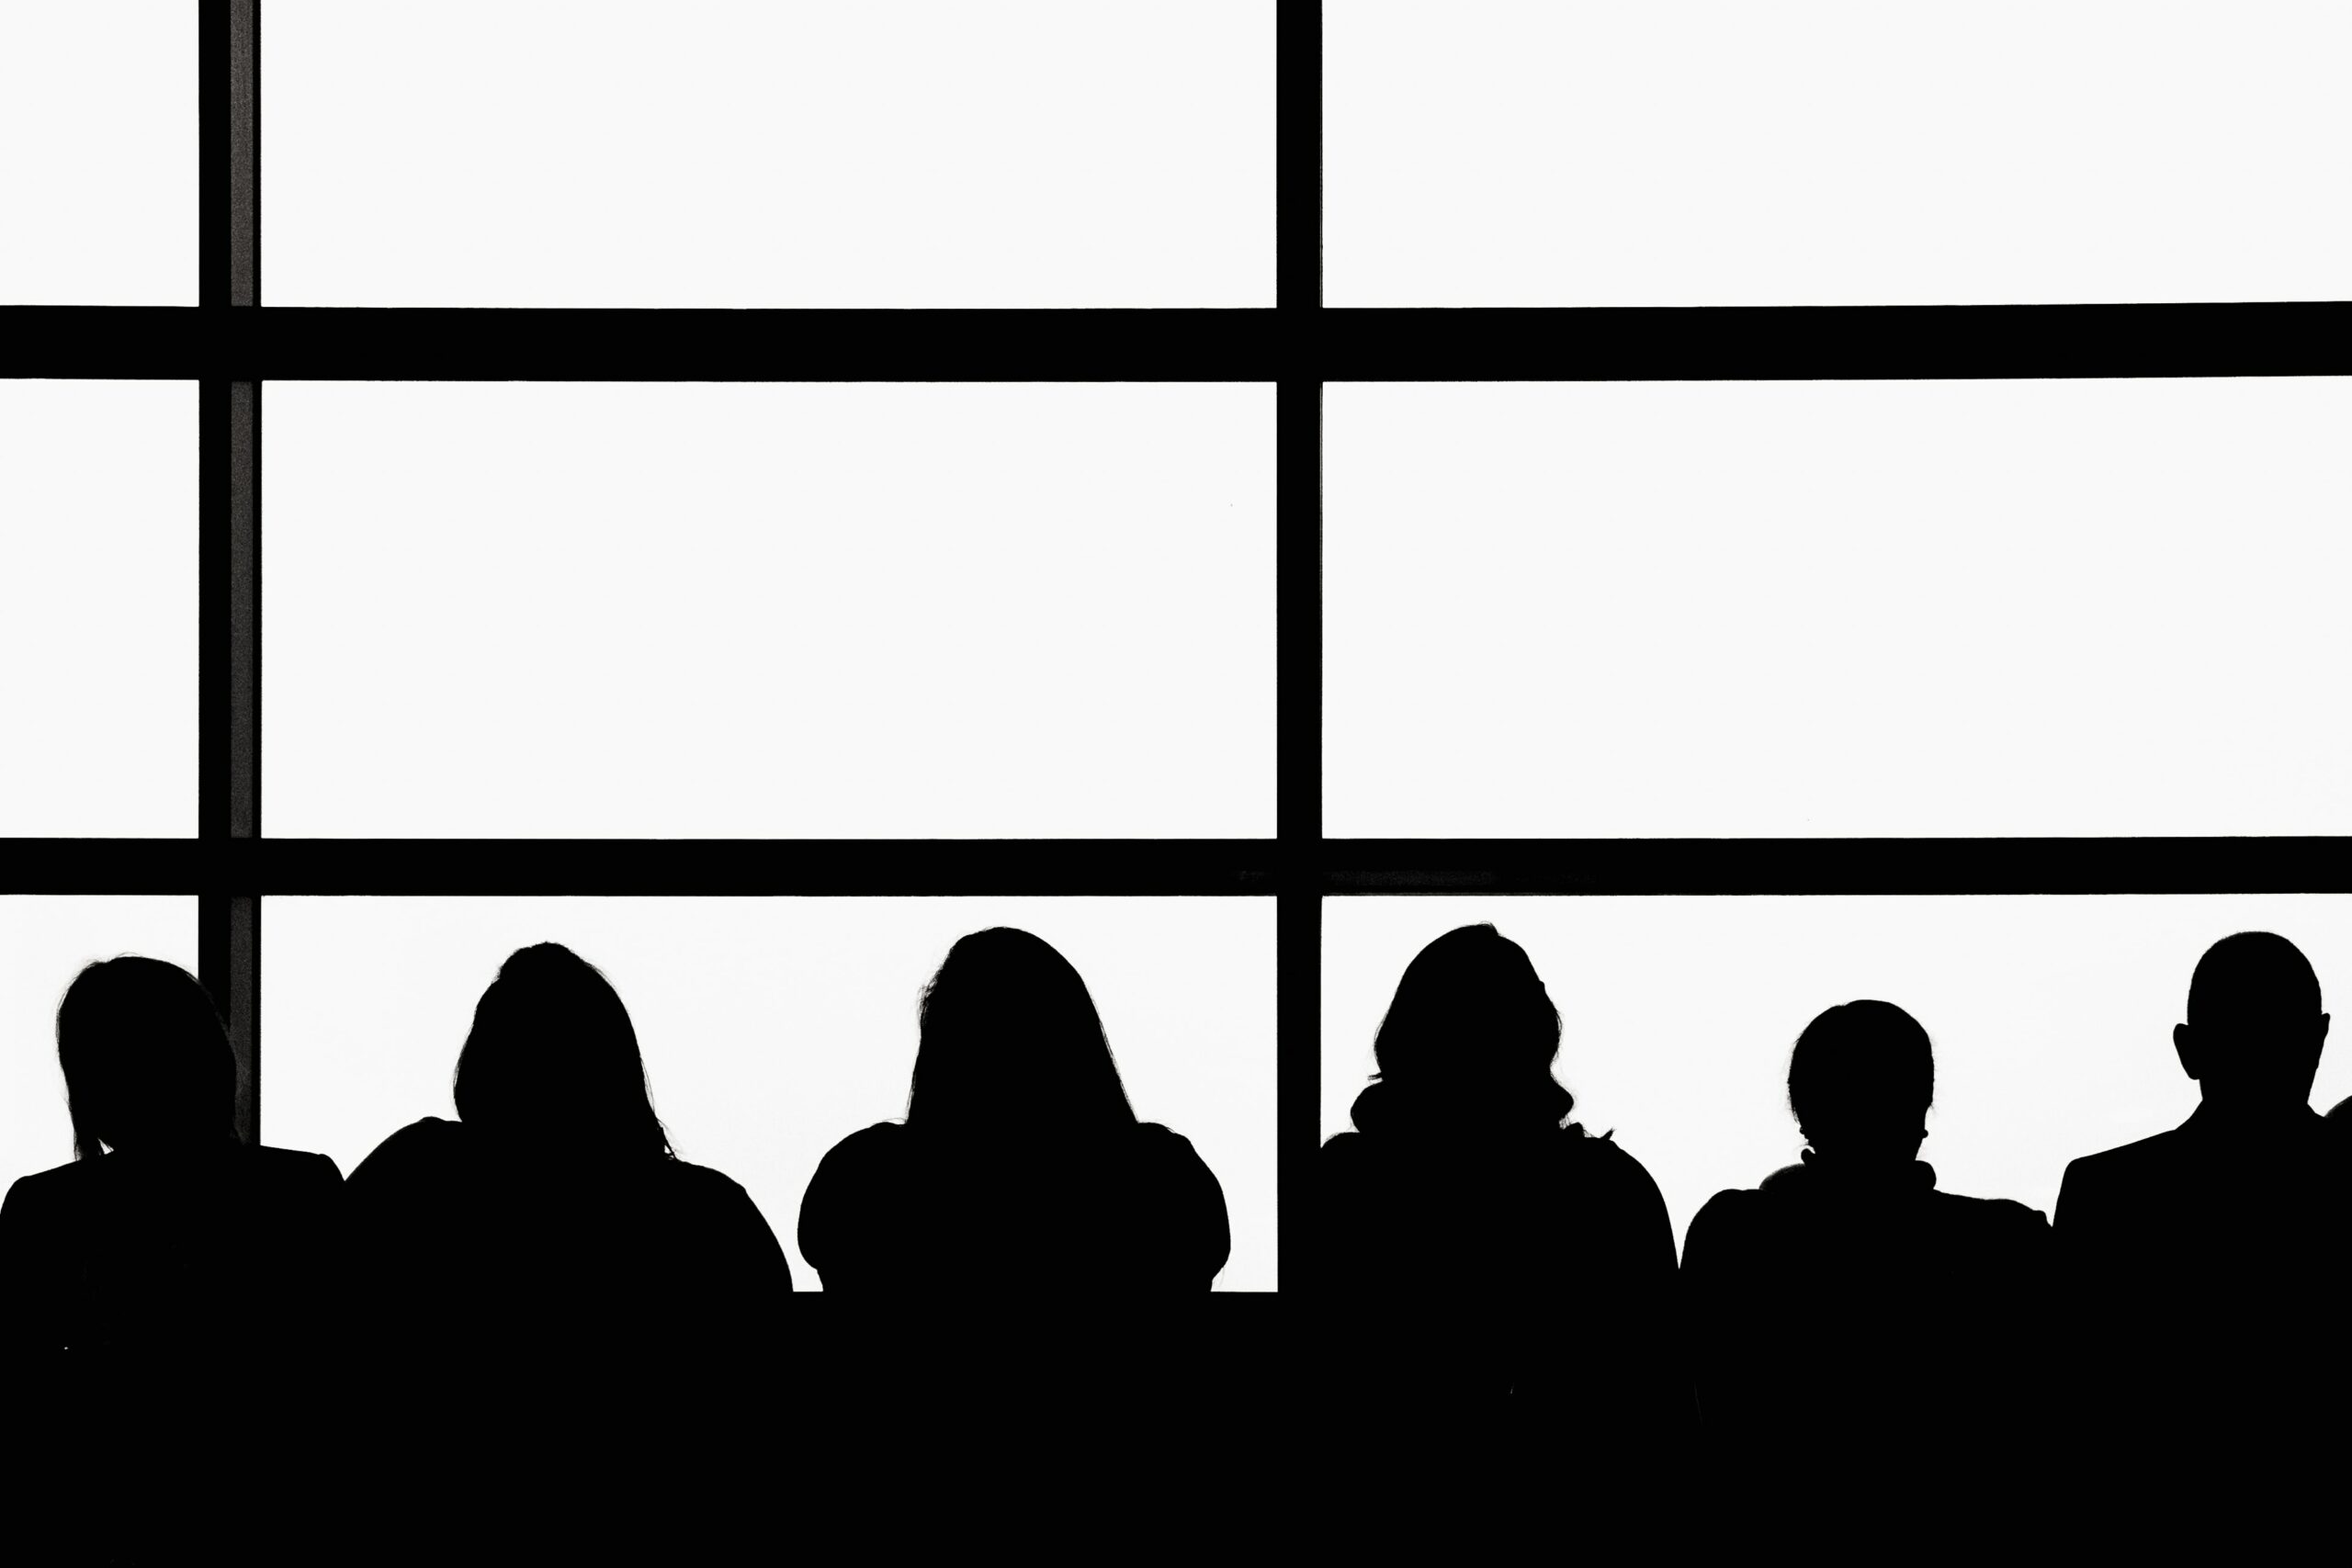 Silhouettes of six individuals